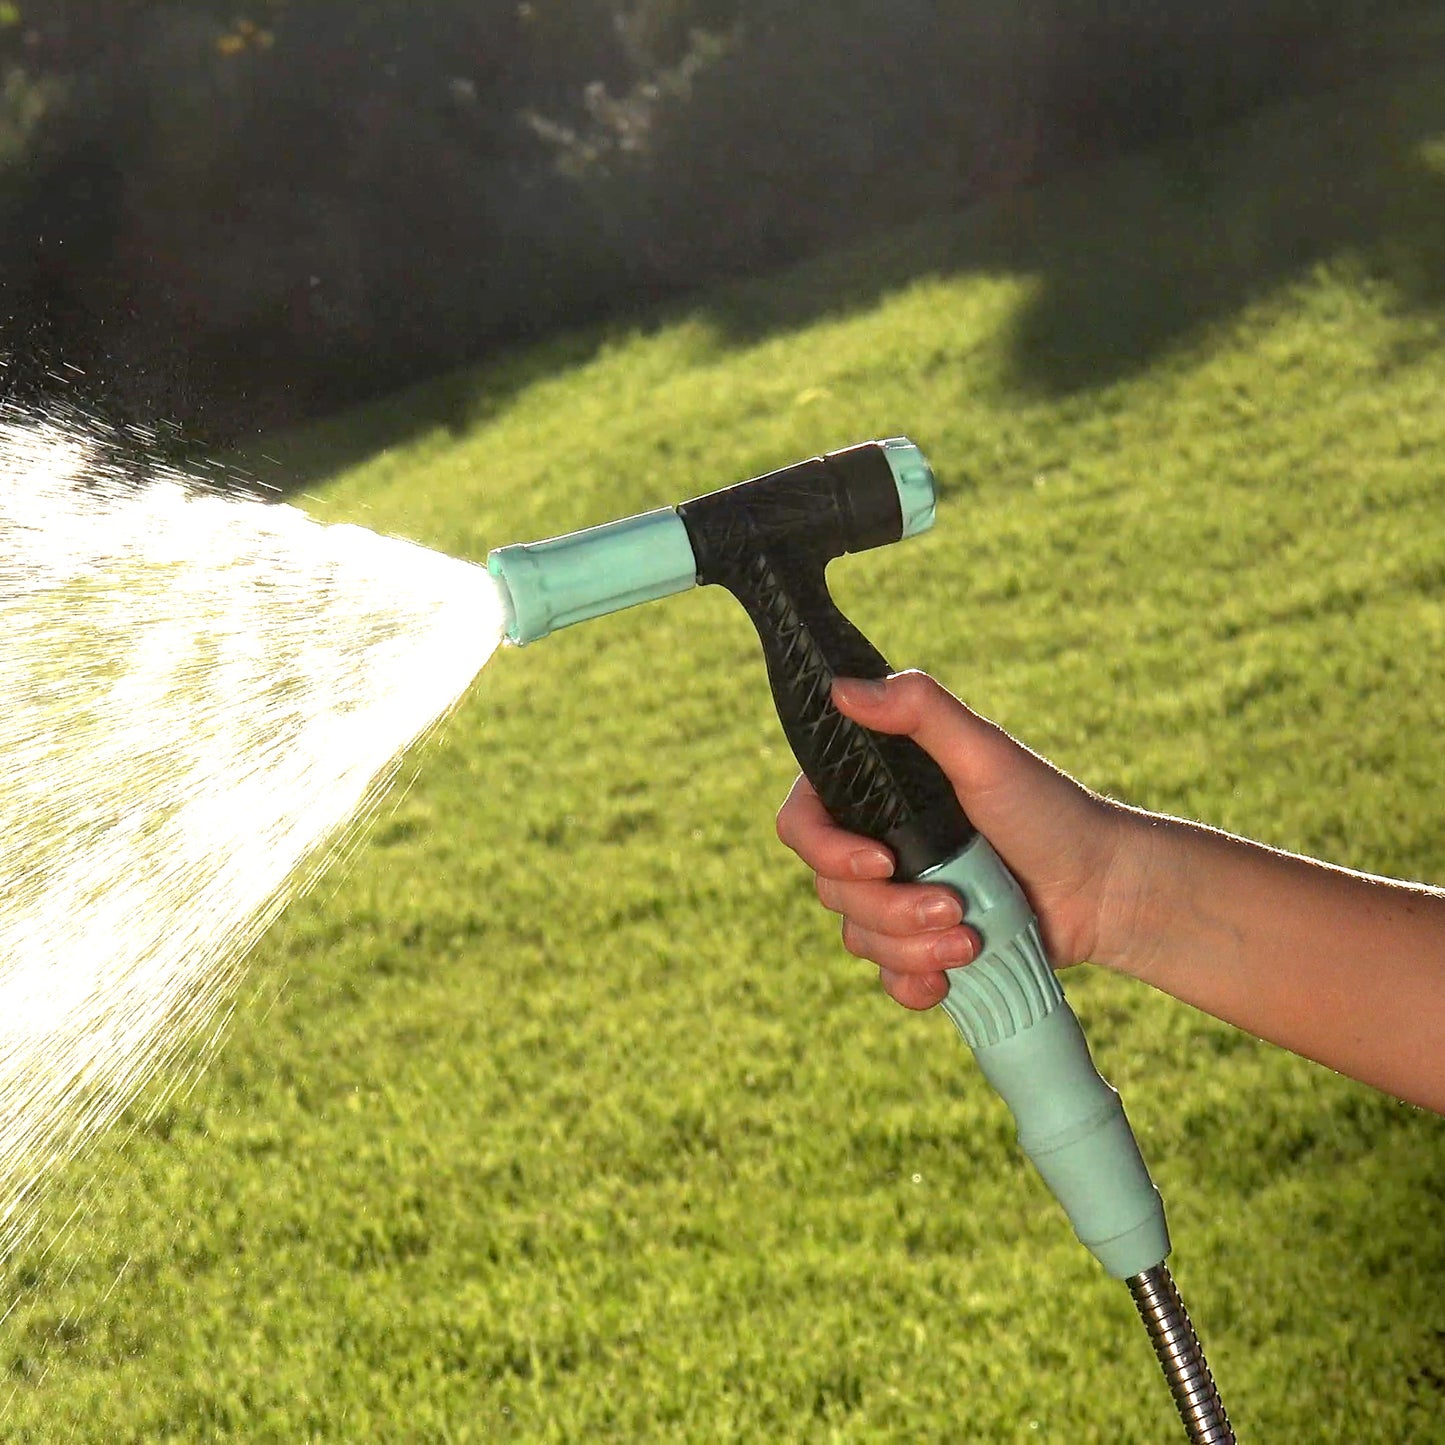 Expanding Metal Garden Hose® with 2-Way Nozzle